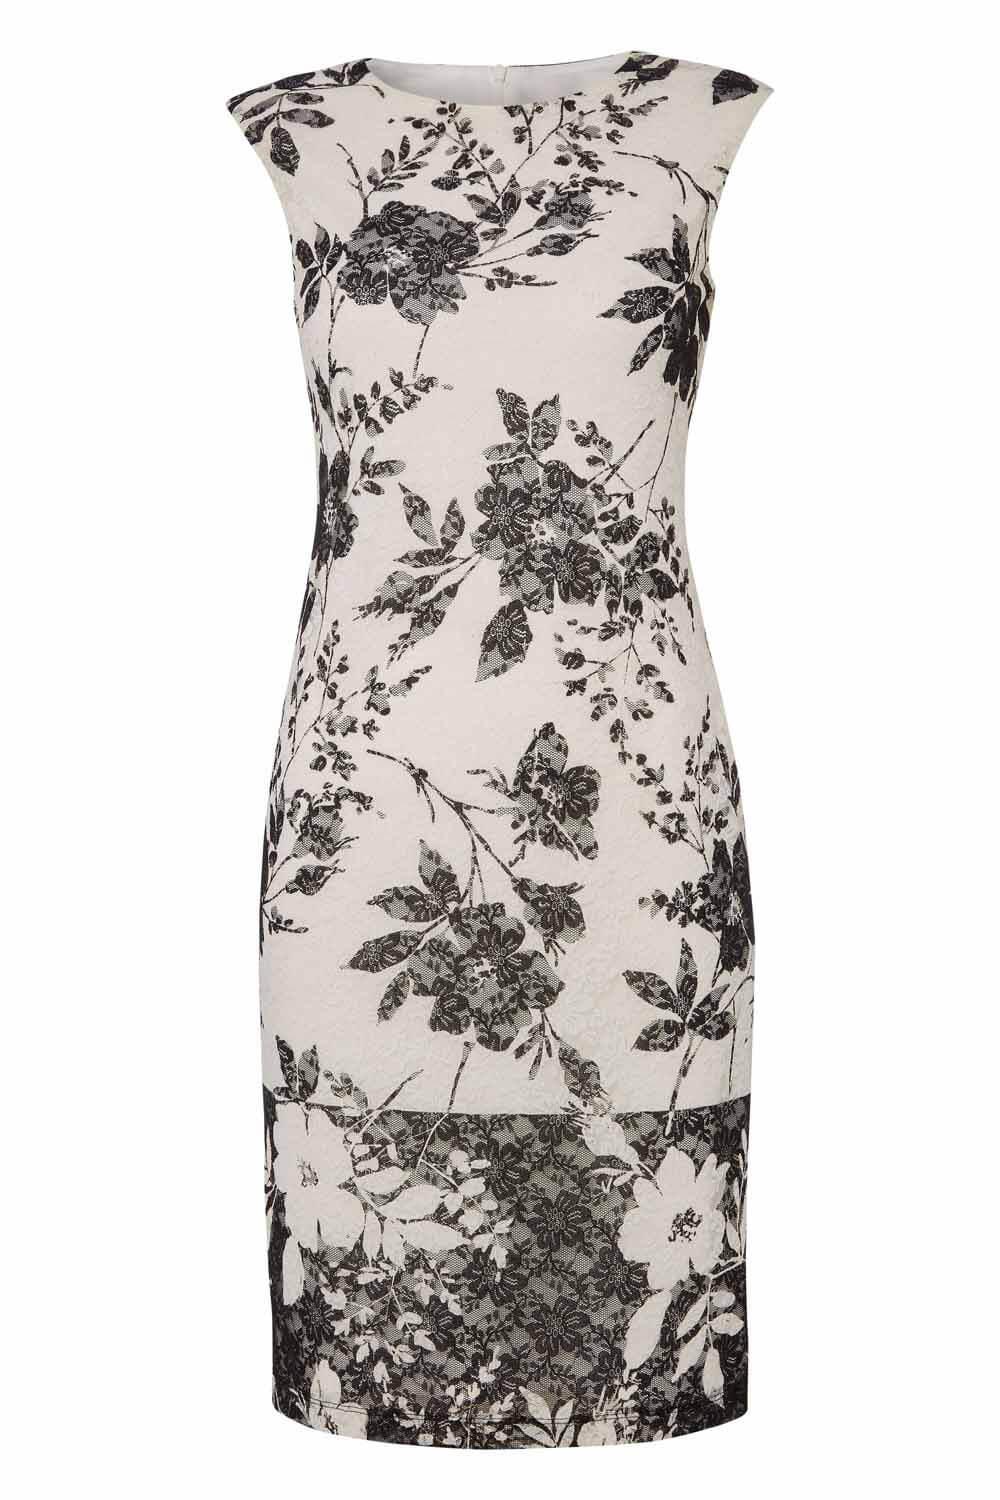 Ivory  Monochrome Floral Print Lace Dress, Image 3 of 3